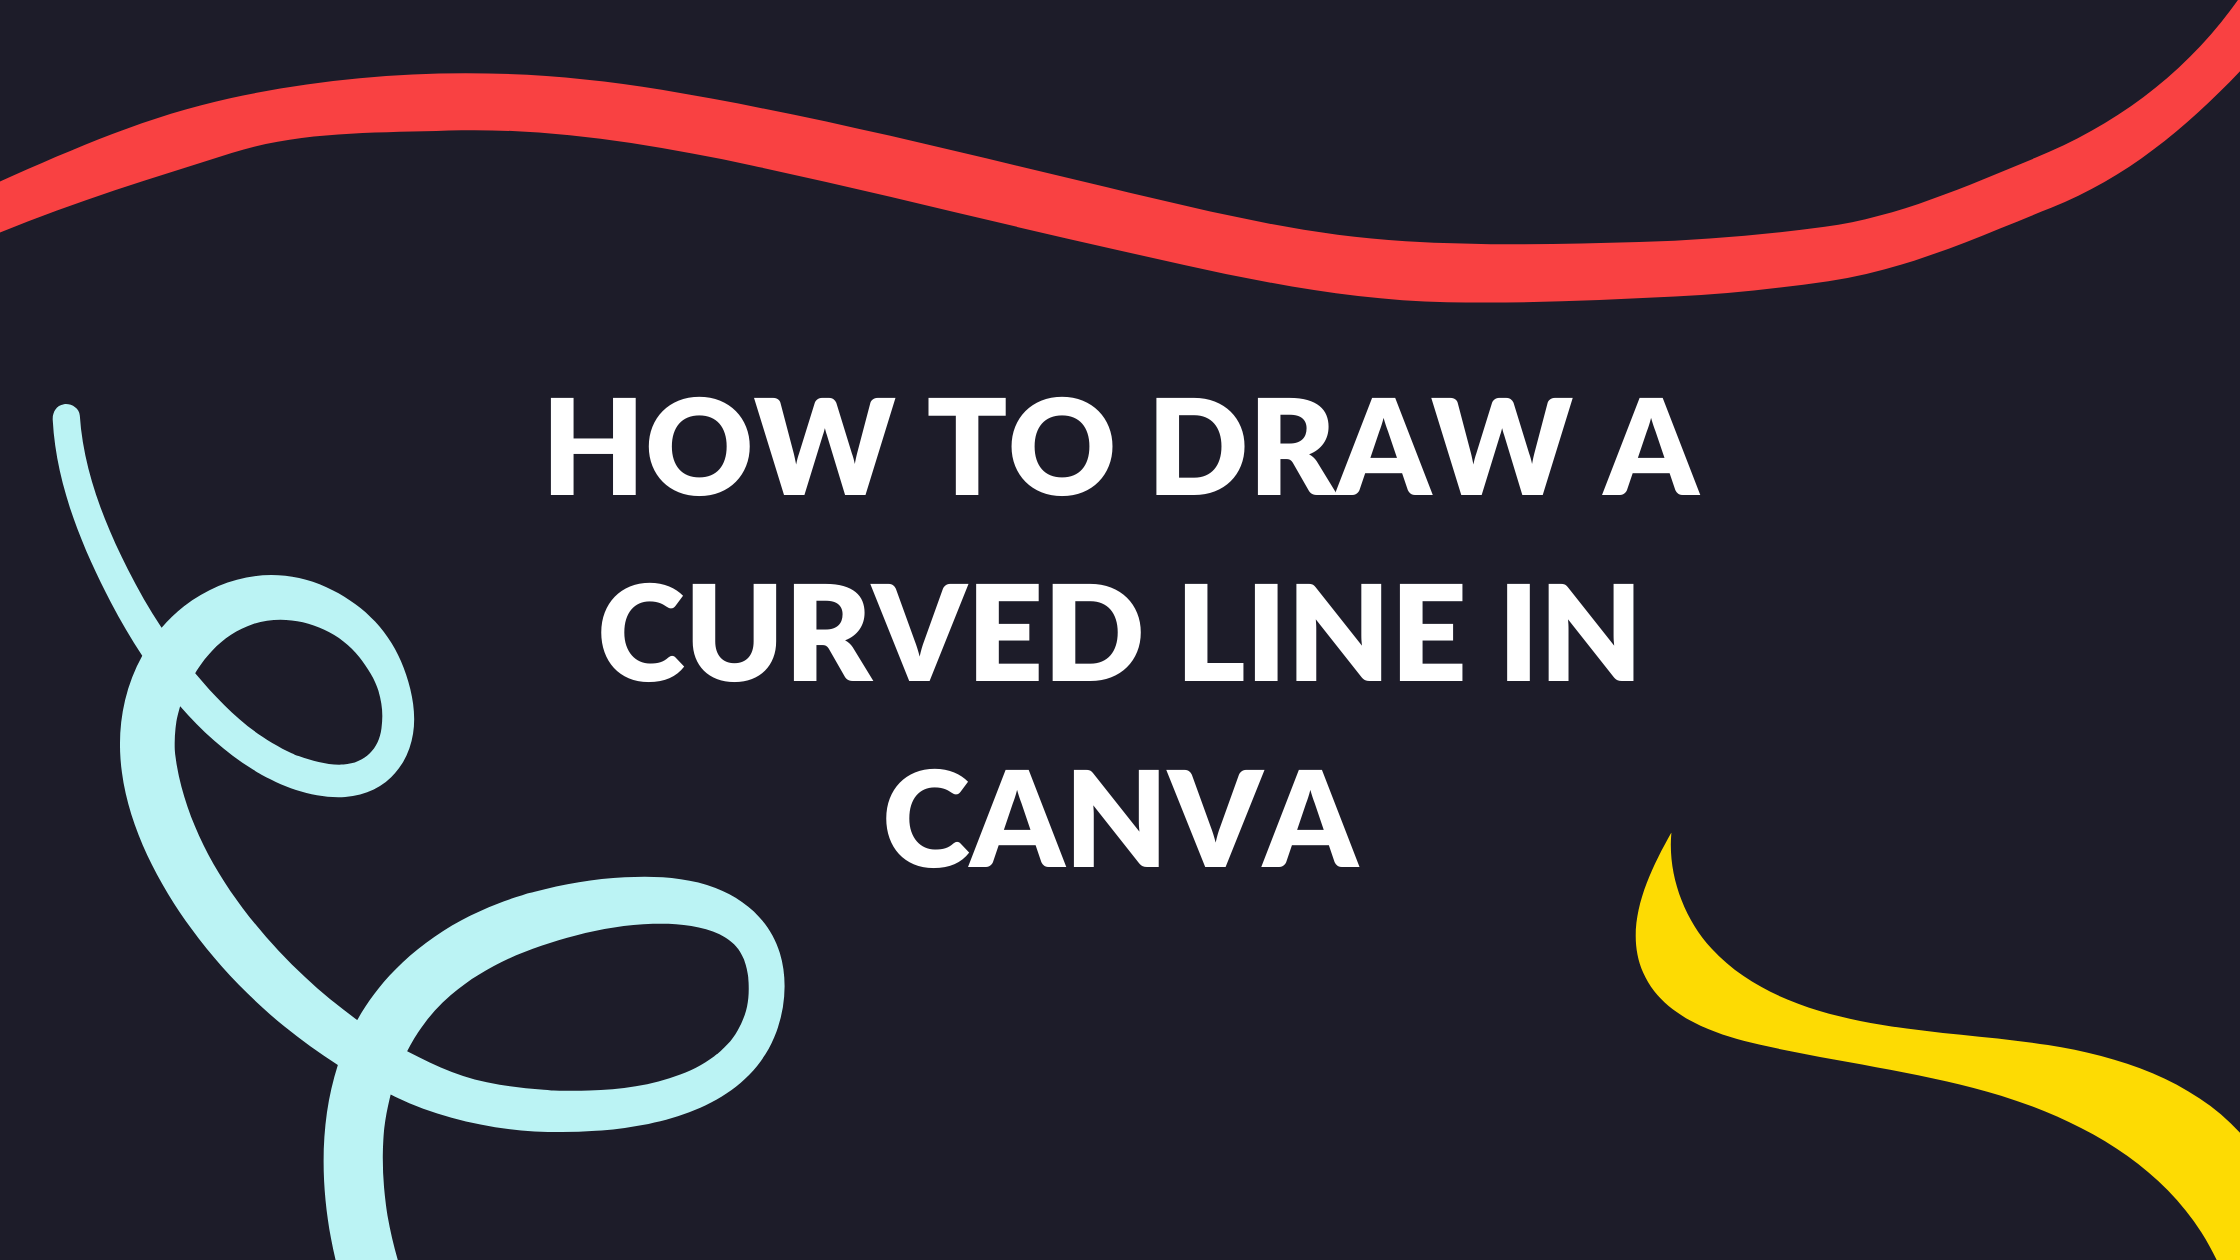 How to Curve a Line in Canva